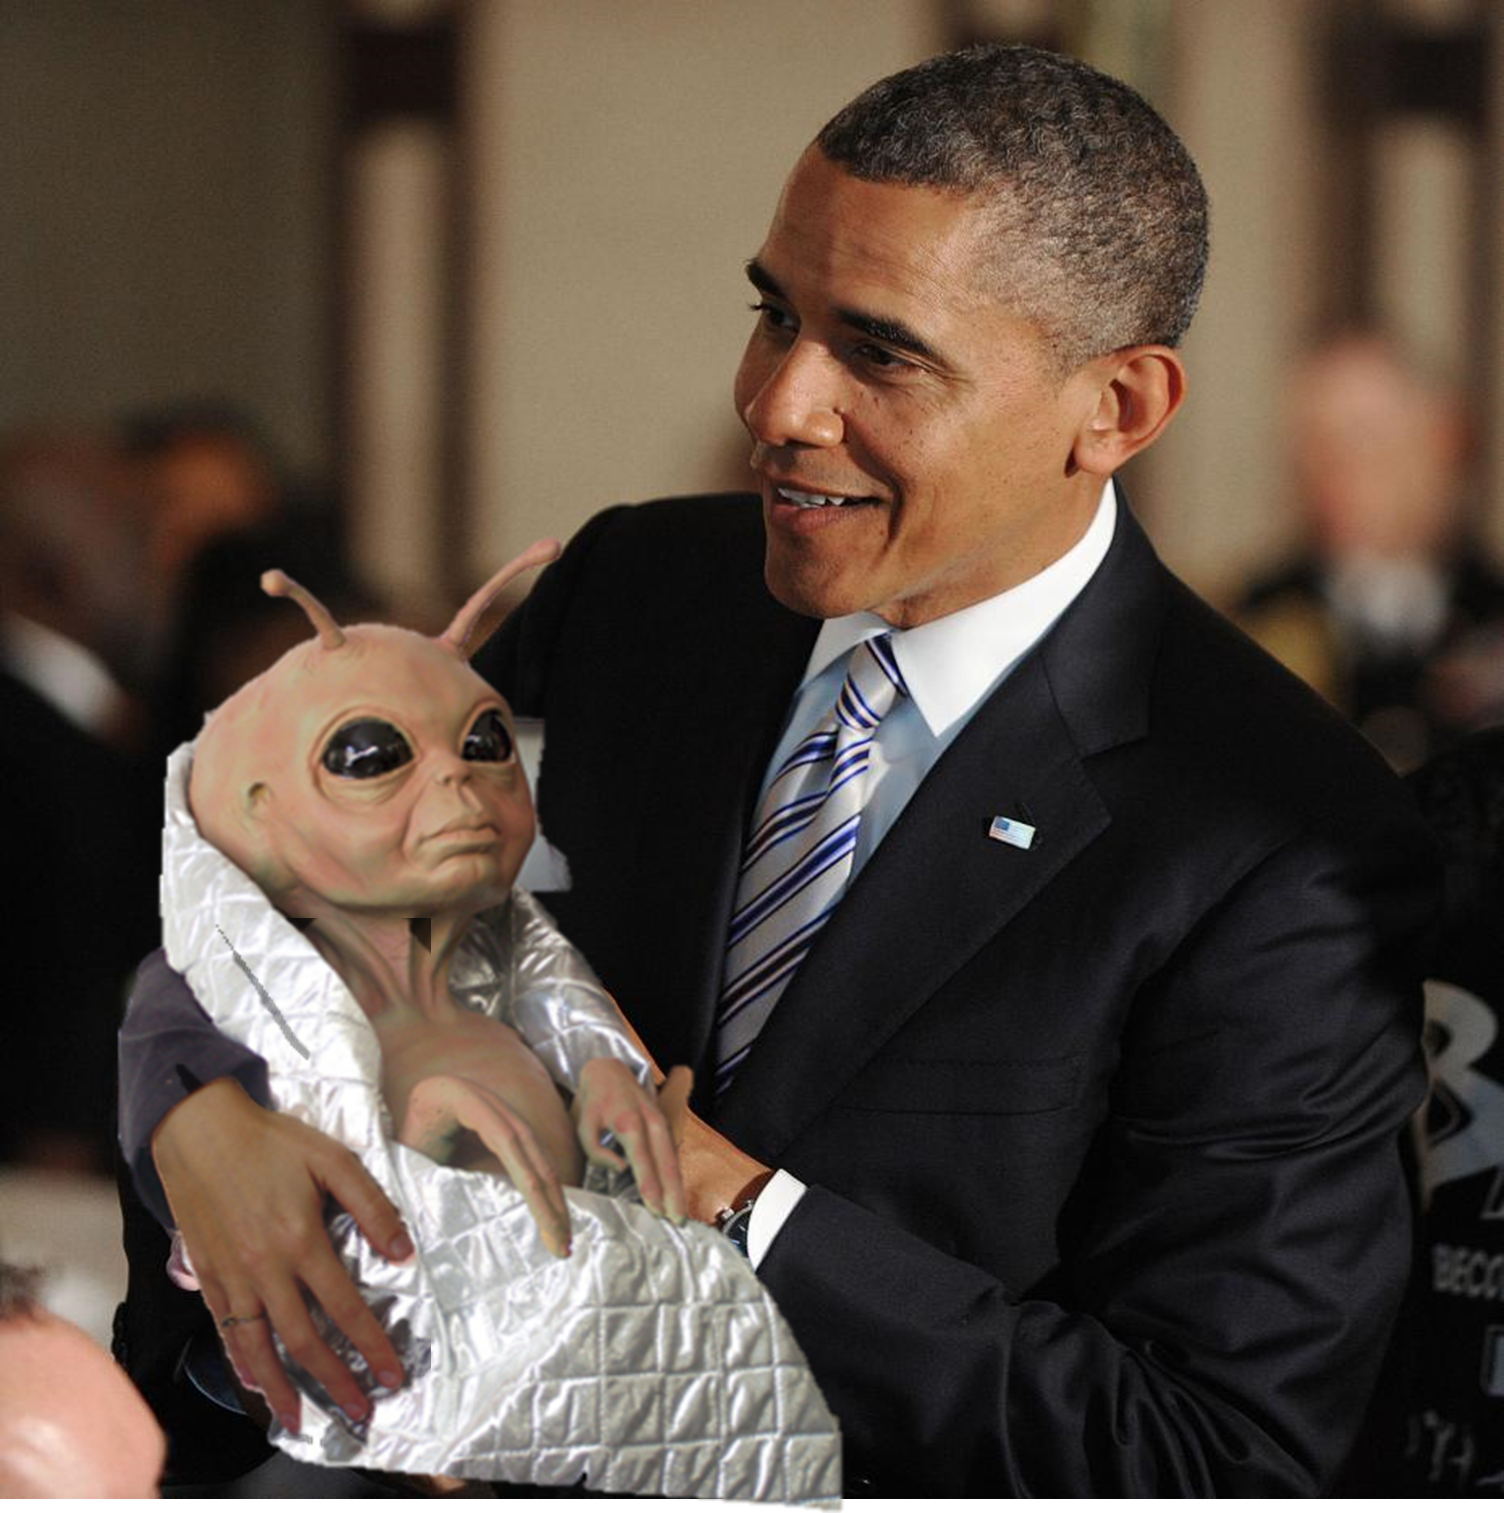 Obama Gives Birth to Alien Baby | Small Winged Potatoes1504 x 1513